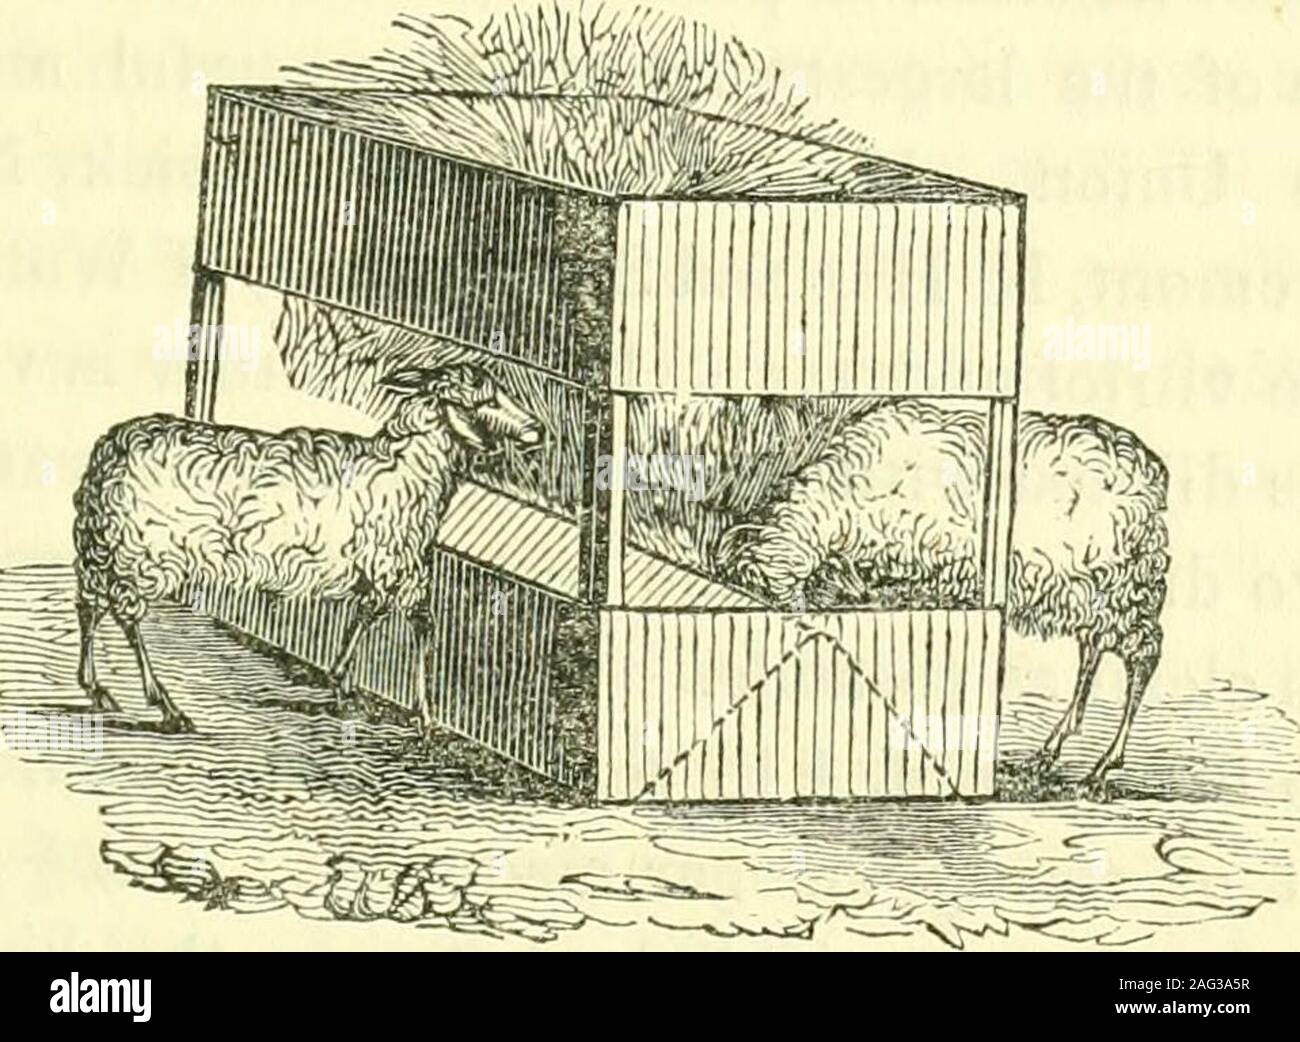 . Report on the agriculture of Massachusetts. is consumed by the sheep. The manger which is preferable to any other is of suchlength as to be easily moved by two persons, and is made withfour or more upright posts, and with two boards or slats extend-ing the whole distance round its sides and ends. The bottomboard on the side may be ten or twelve inches in width ; andabove that, leaving a space of about a foot or fourteen inches,there may be another board of about six or eight inches inwidth. The width of the manger or box should be about twofeet. It should have a tight bottom, with two pieces Stock Photo